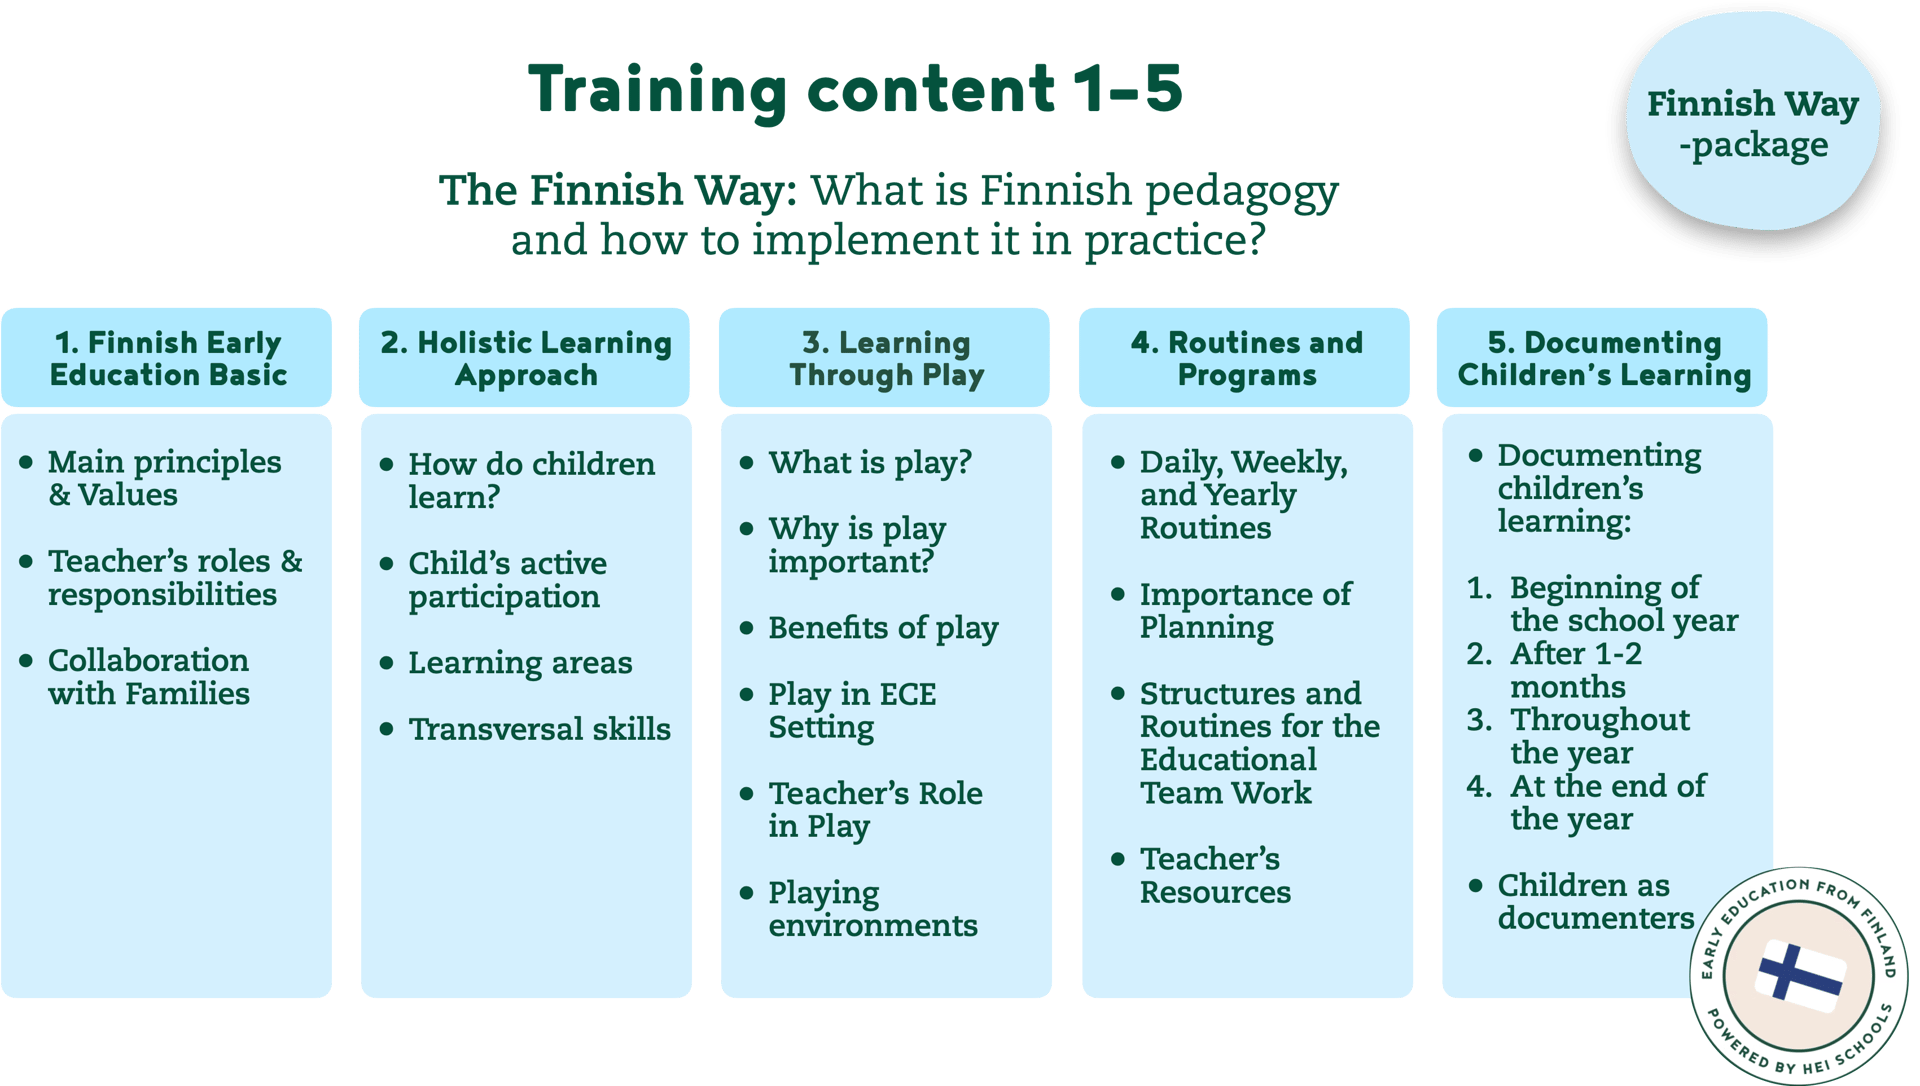 Finnish Way package content